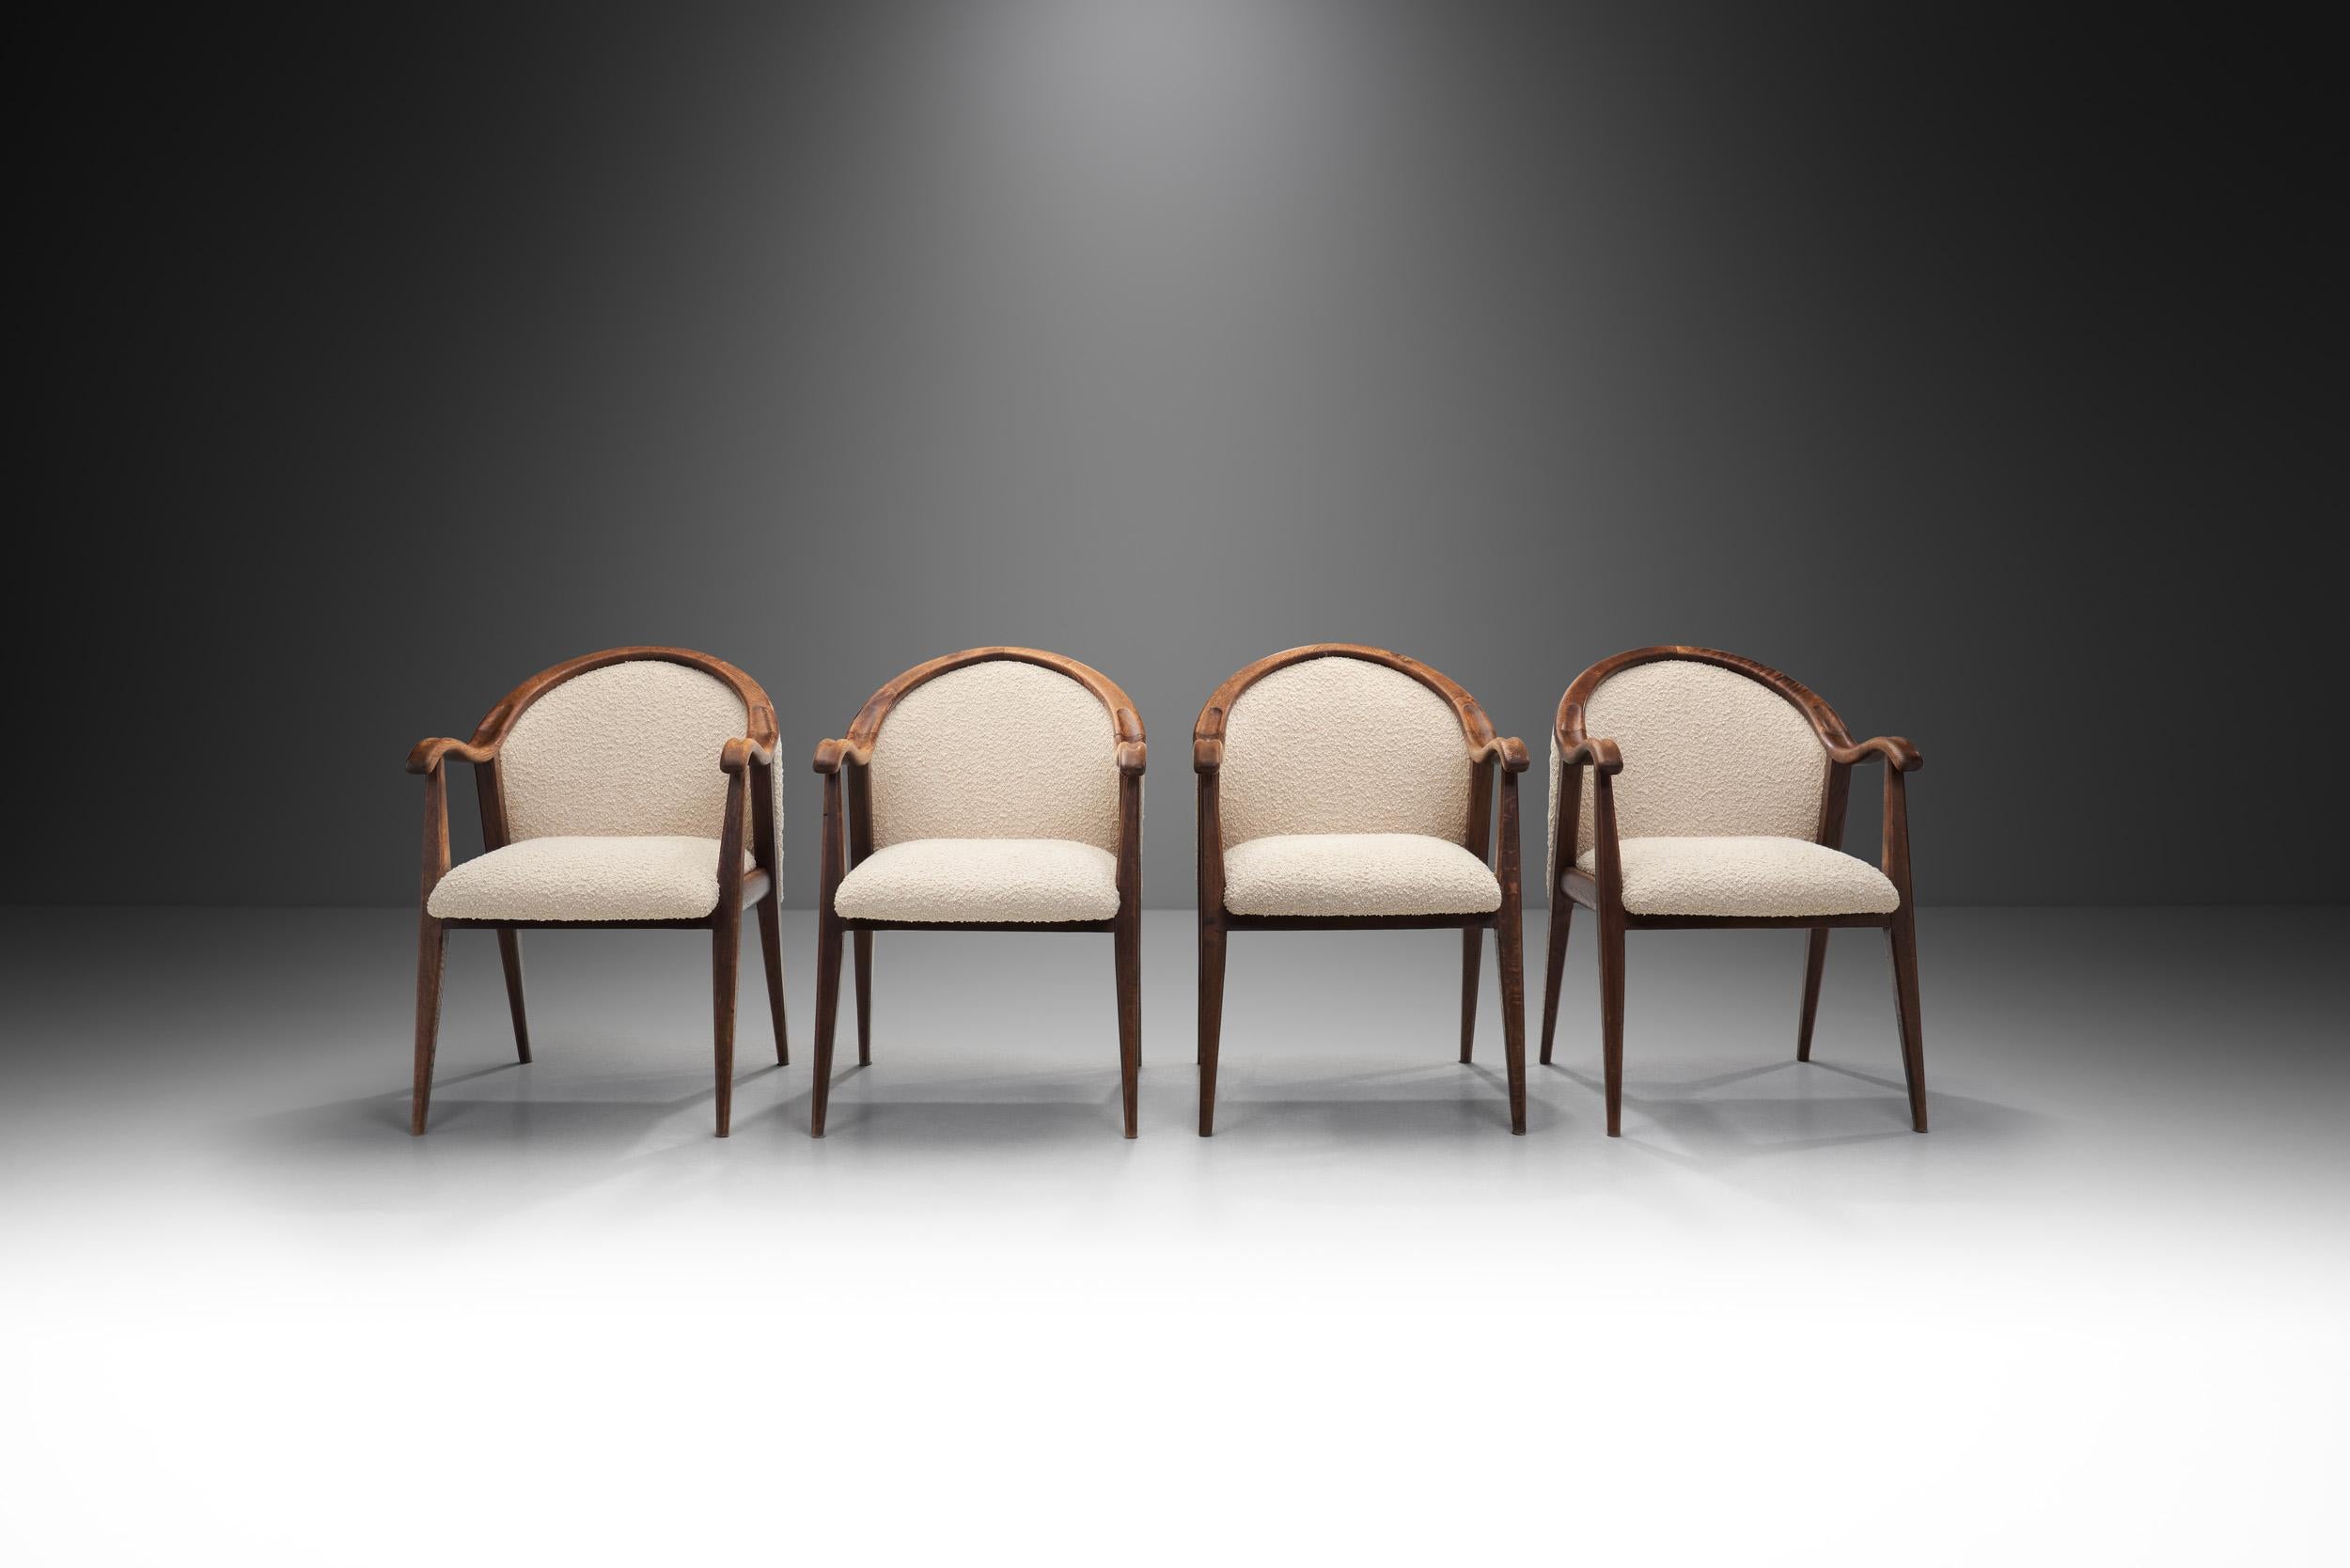 Mid-20th Century French Oak Art Deco Chairs in Taupe Bouclé, France 1930s For Sale